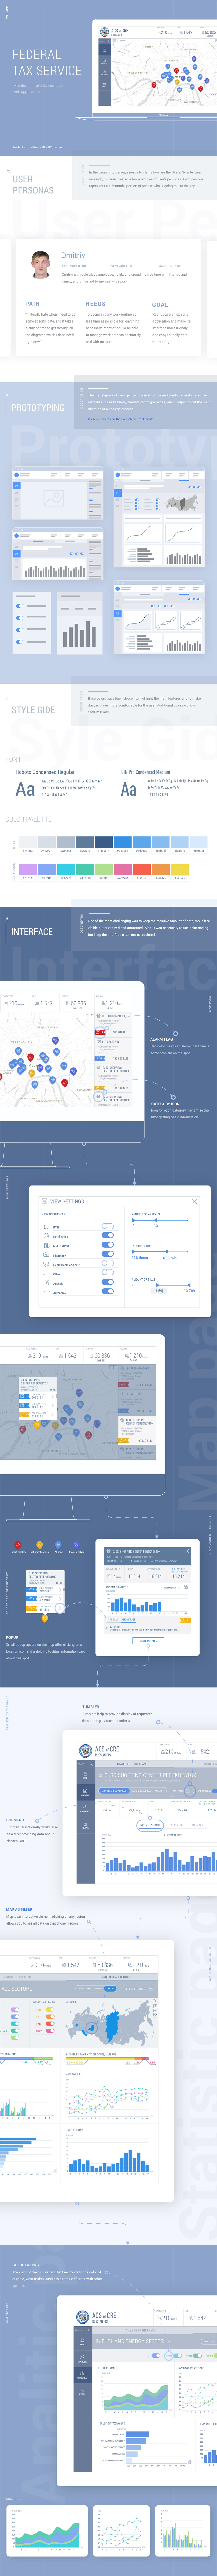 UI Taxes Federal ux dashboard blue White light flat material